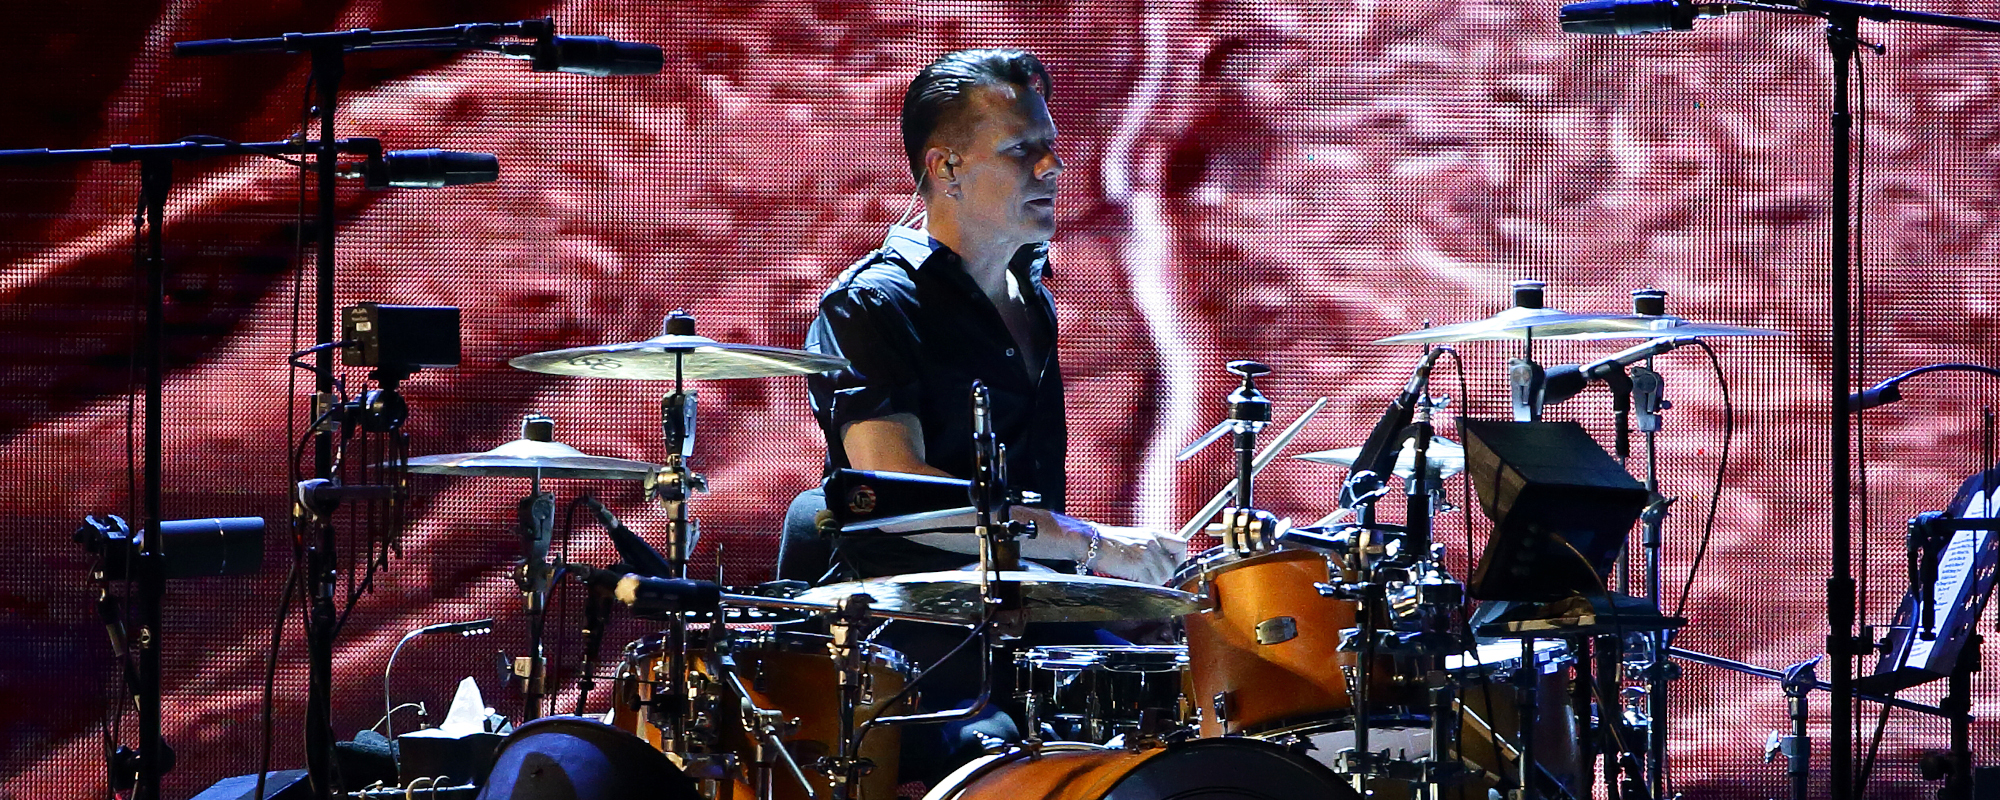 U2 Drummer Larry Mullen to Skip 2023 Tours to Deal with “Physical” Issues, Not Leaving the Band